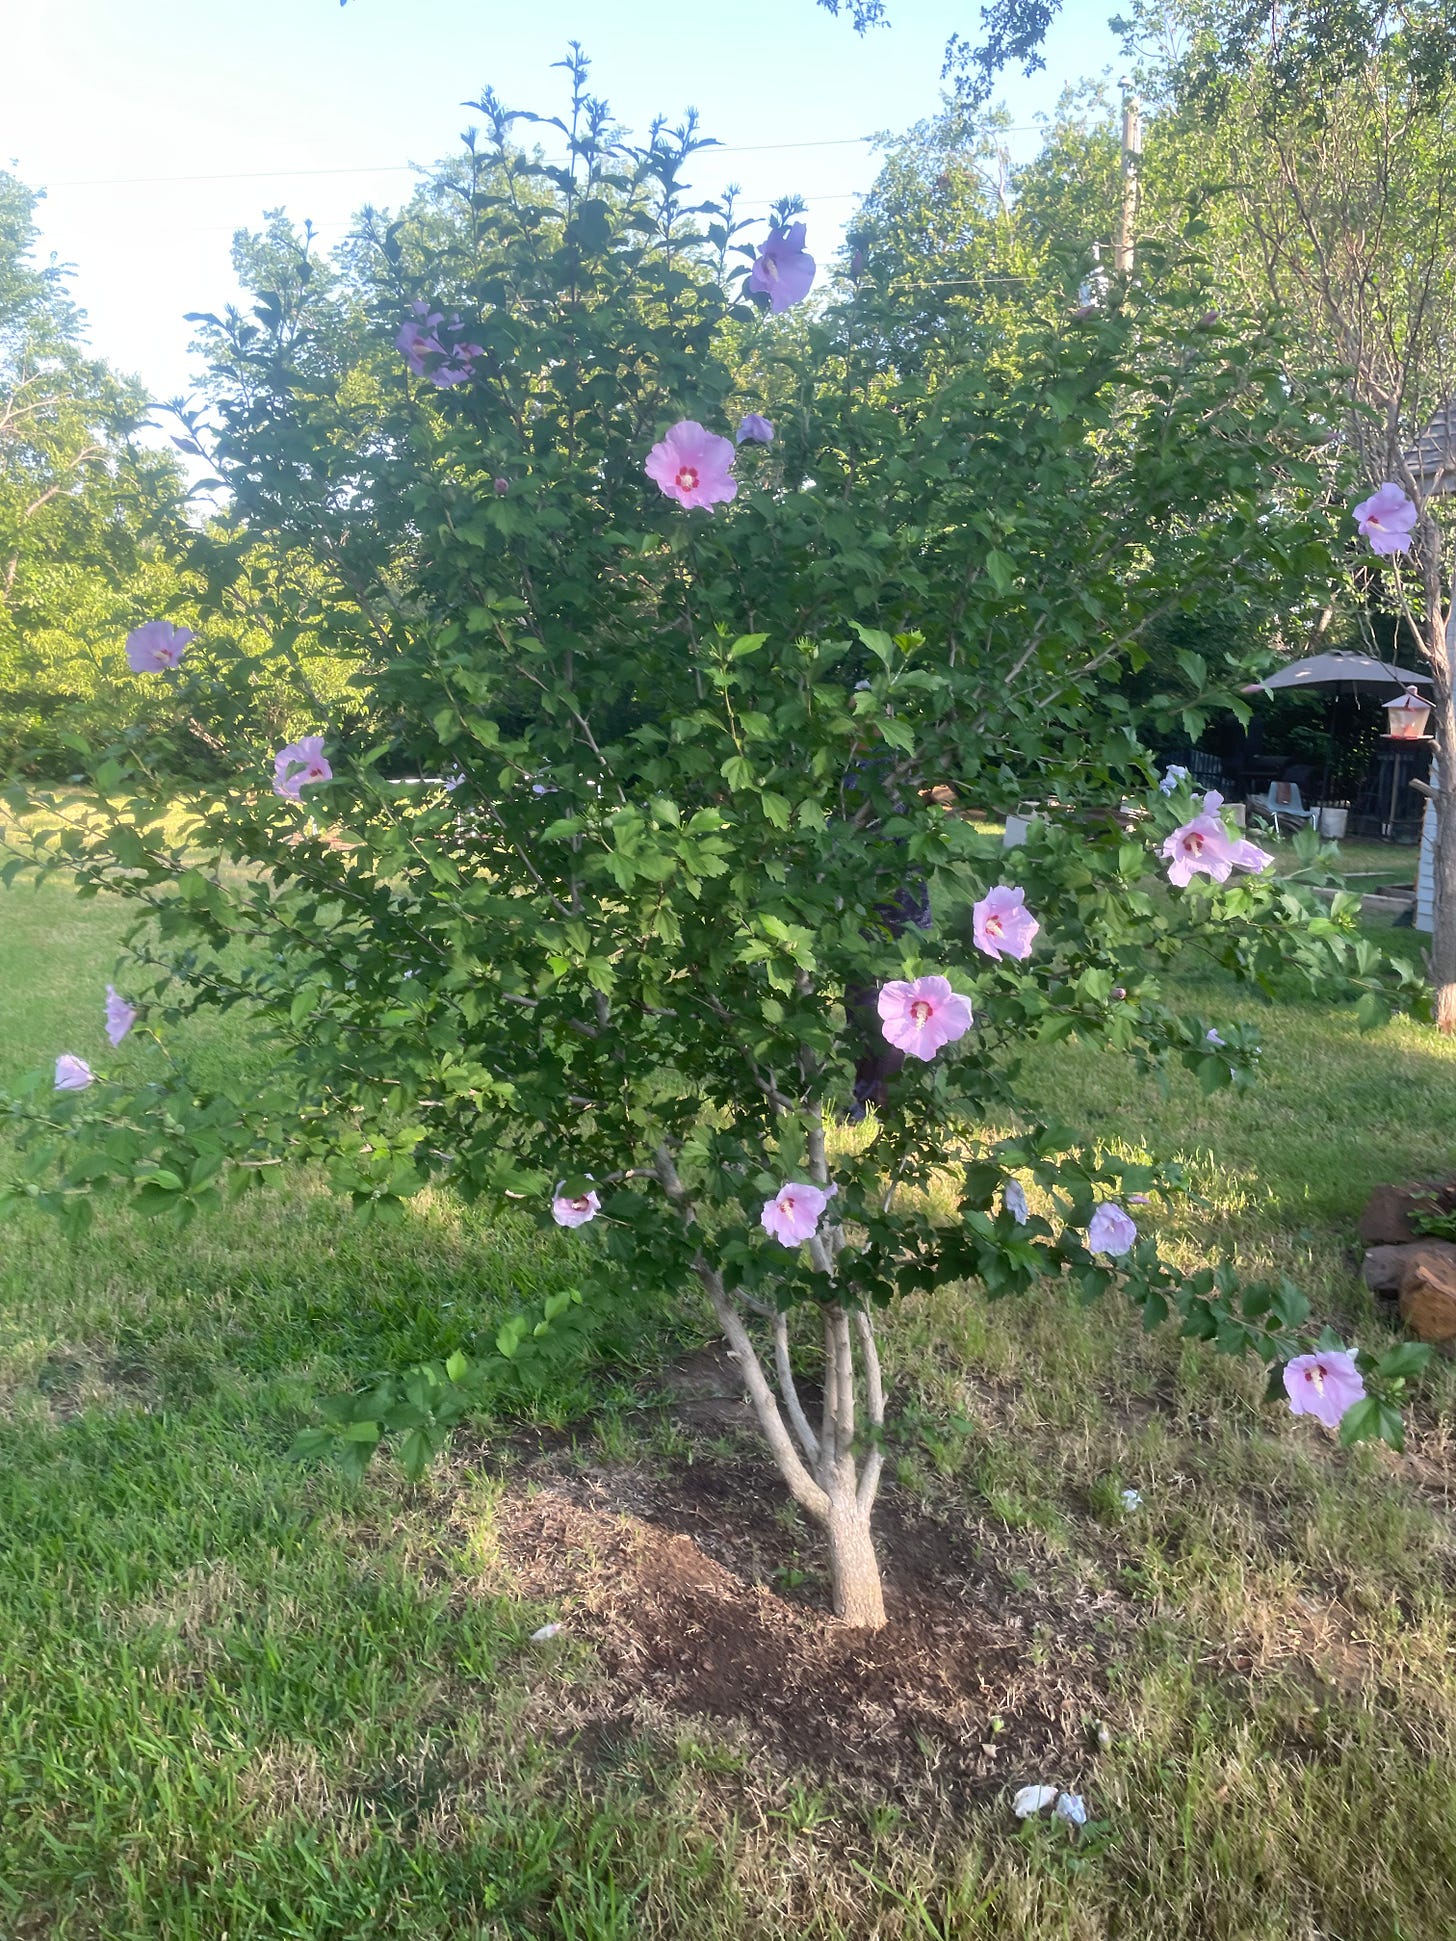 Tree with pink flowers.